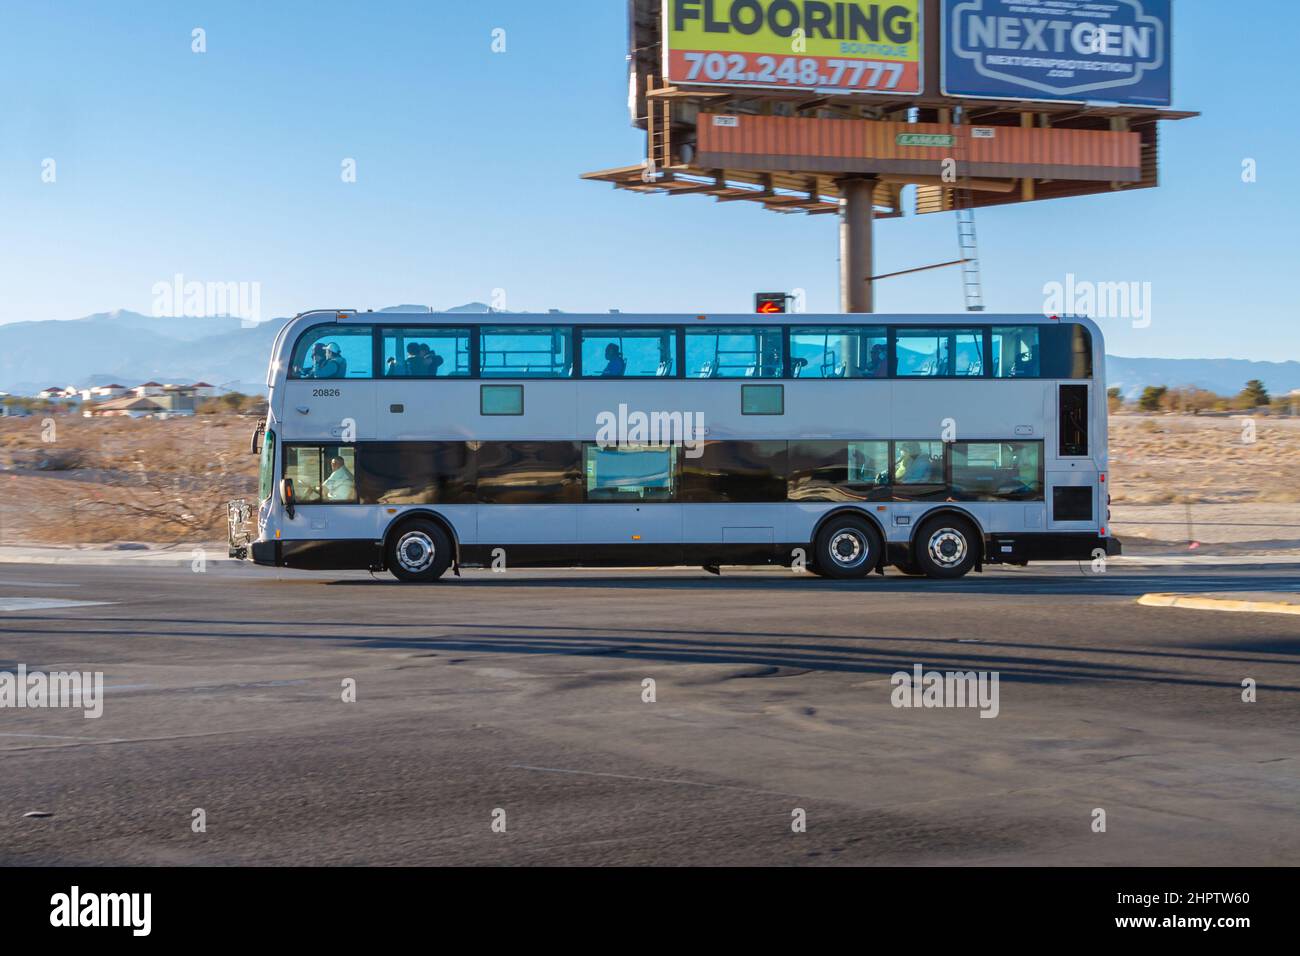 Las Vegas, NV, USA – February 17, 2022: A double decker white bus turning with driver and passengers wearing face mask in Las Vegas, Nevada. Stock Photo